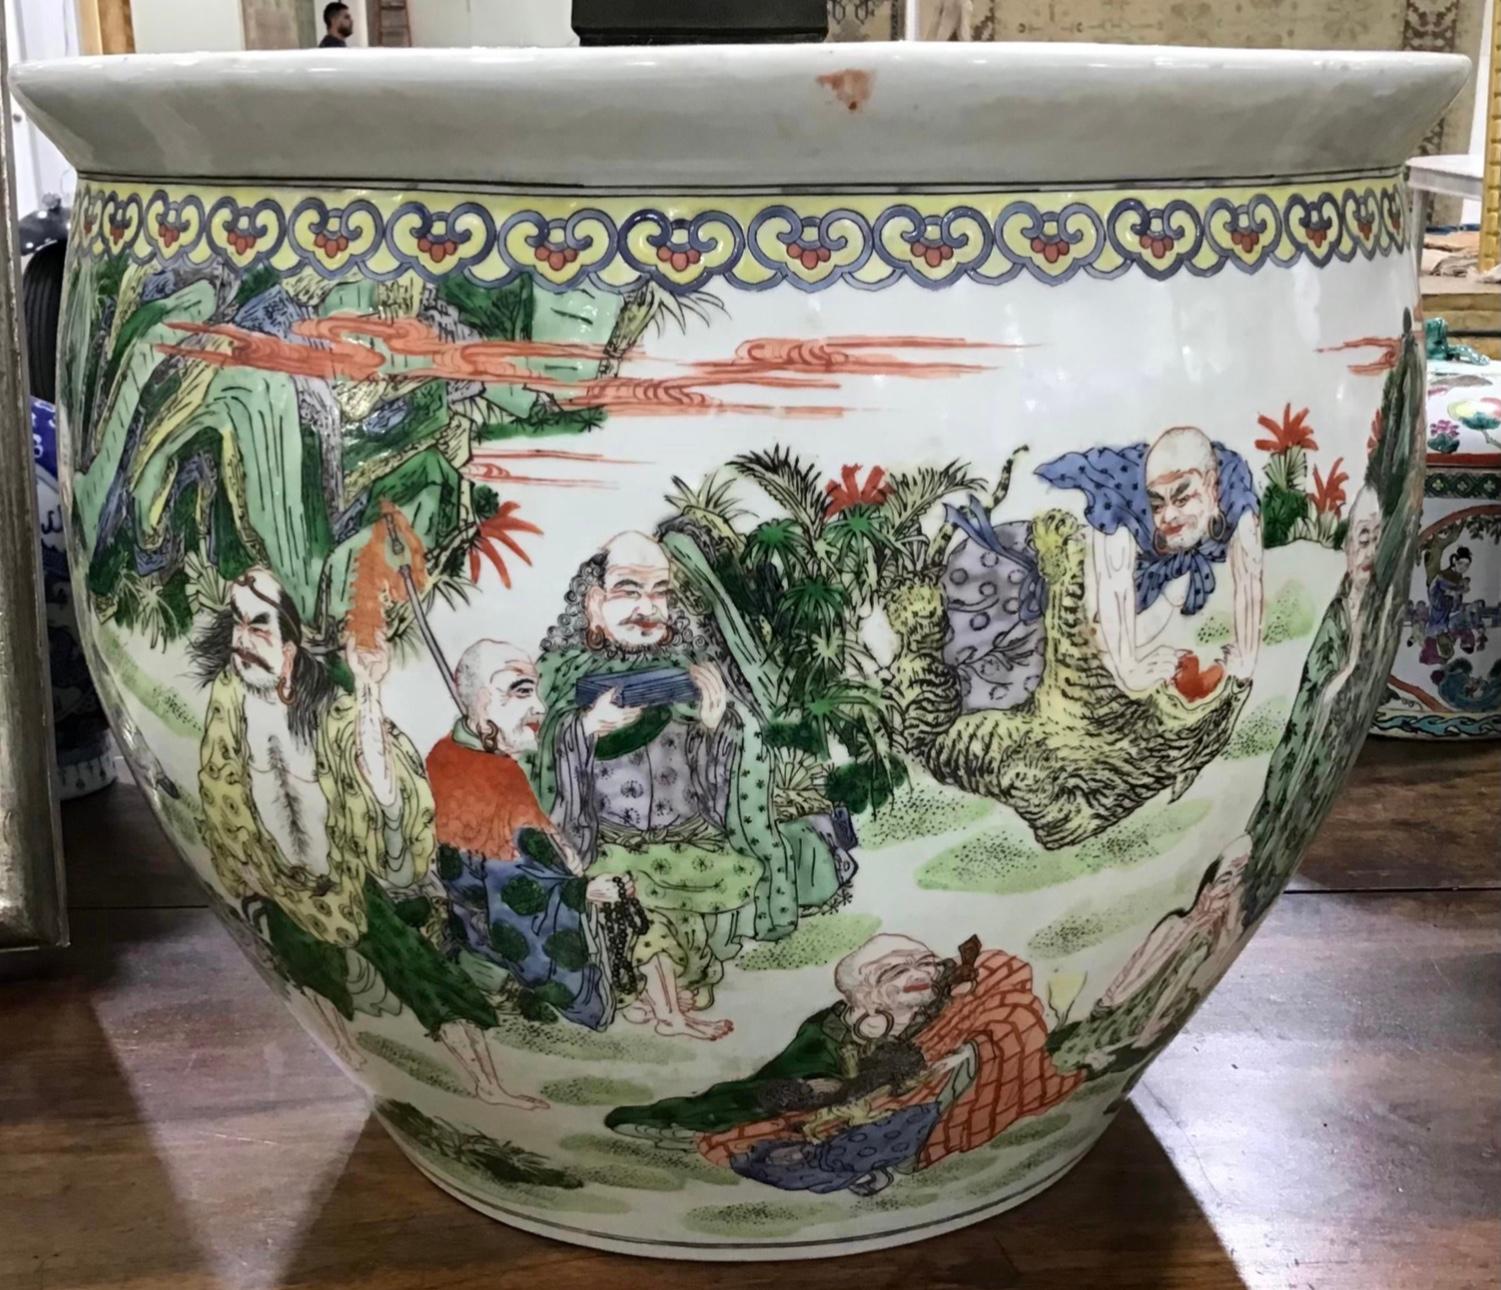 Large colorful vintage Chinese porcelain fishbowl. Features Classic, oriental scenes with Chinese people throughout. The ceramic bowl is painted on the inside as well with a traditional coy-fish illustration. The fishbowl could also be used as deep